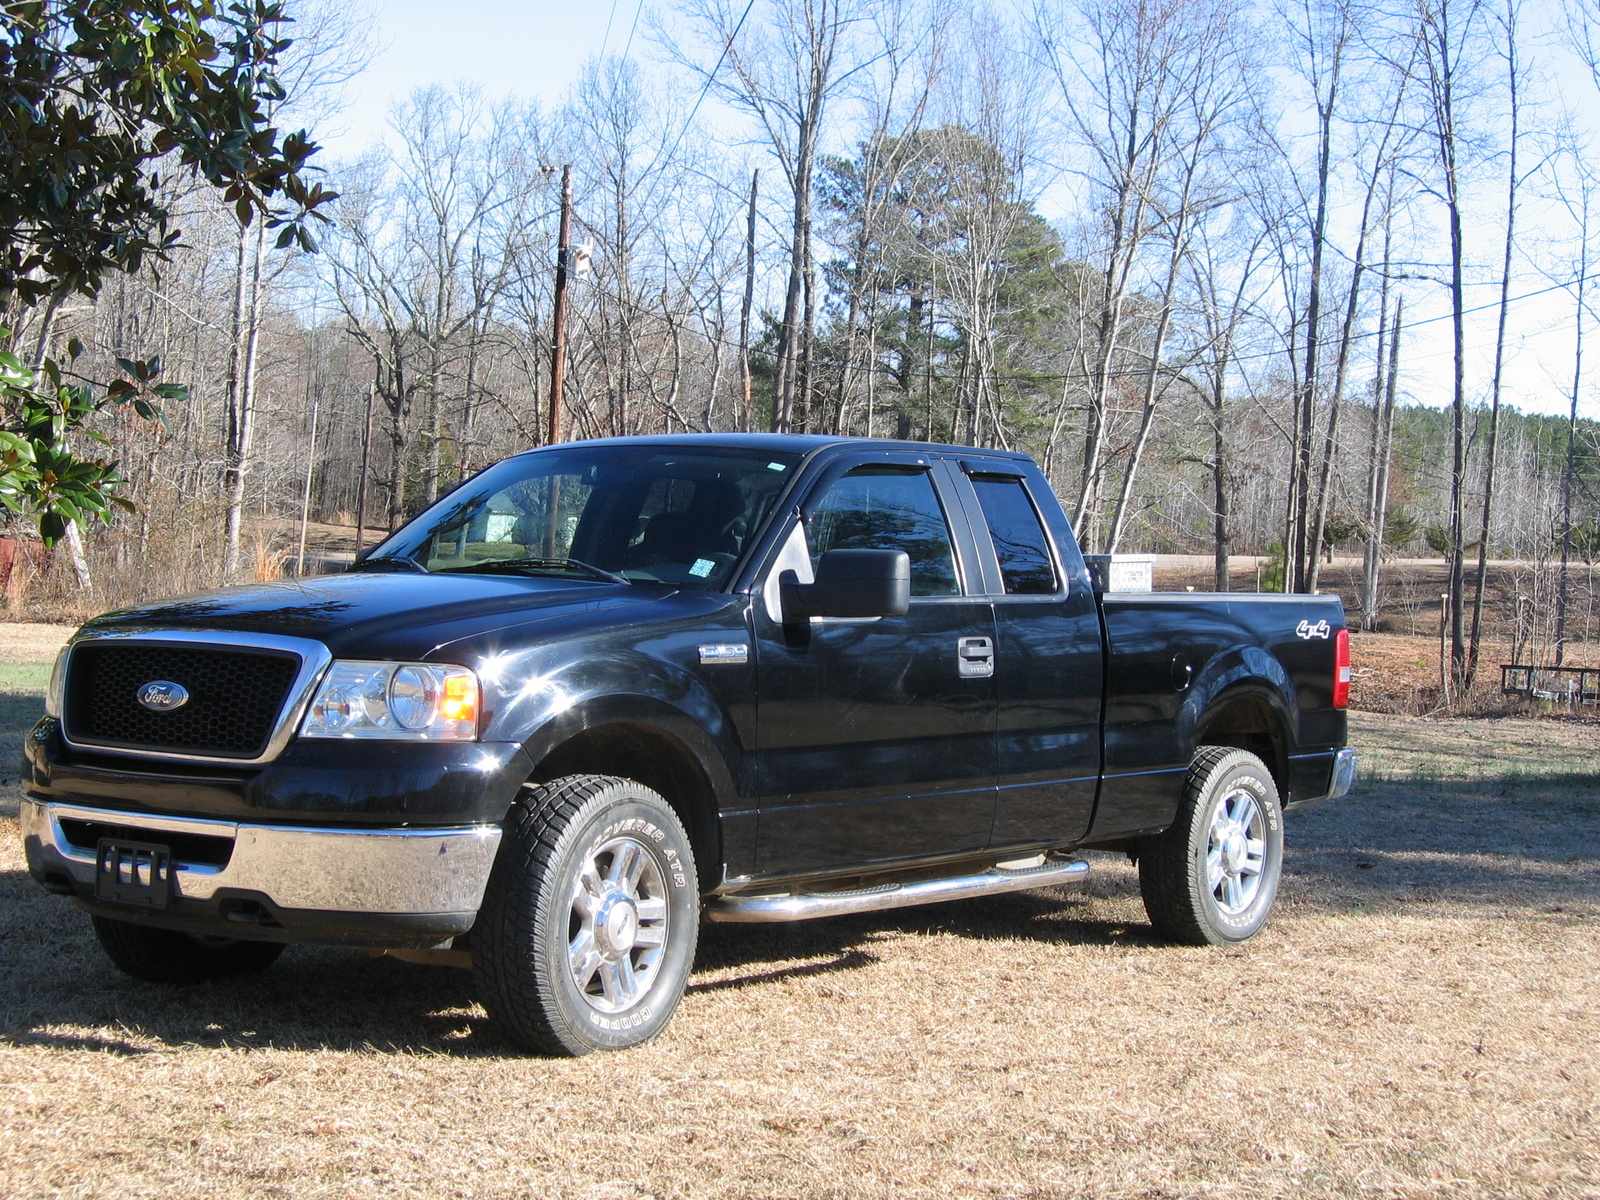 2006 Ford f150 harley davidson review #9